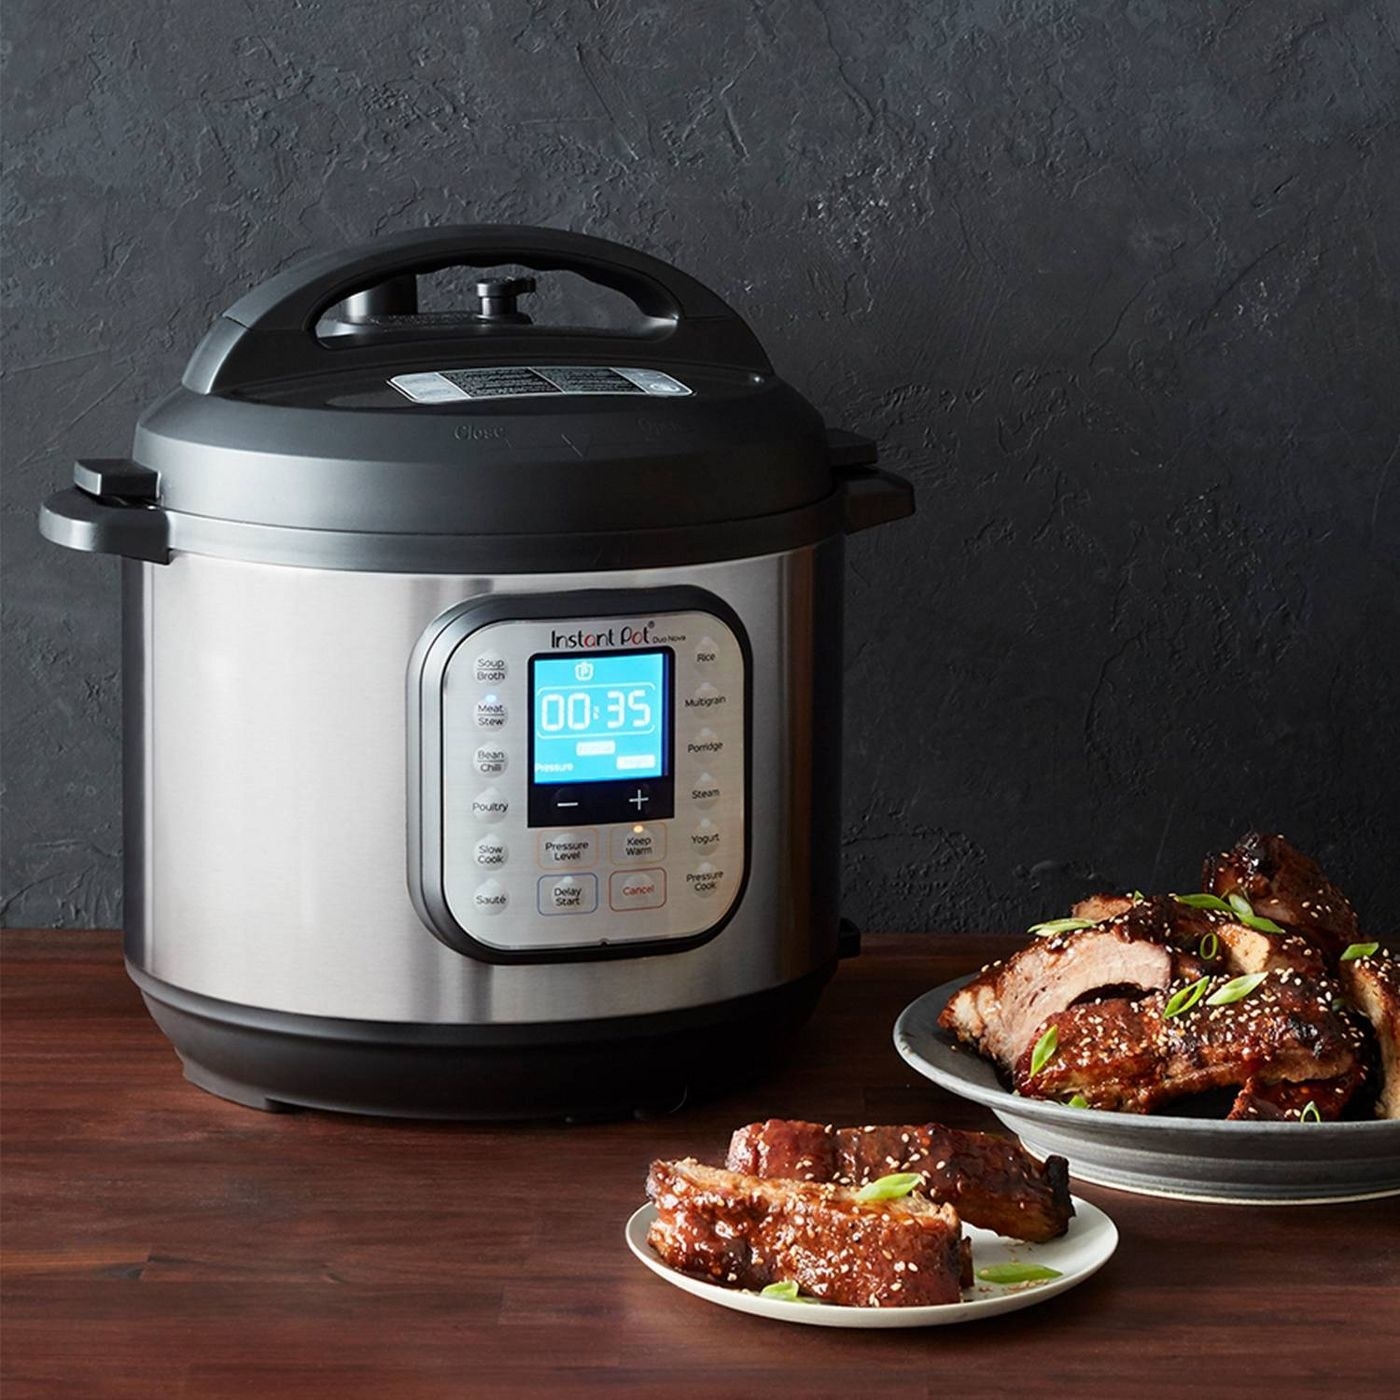 The instant pot, shown with ribs